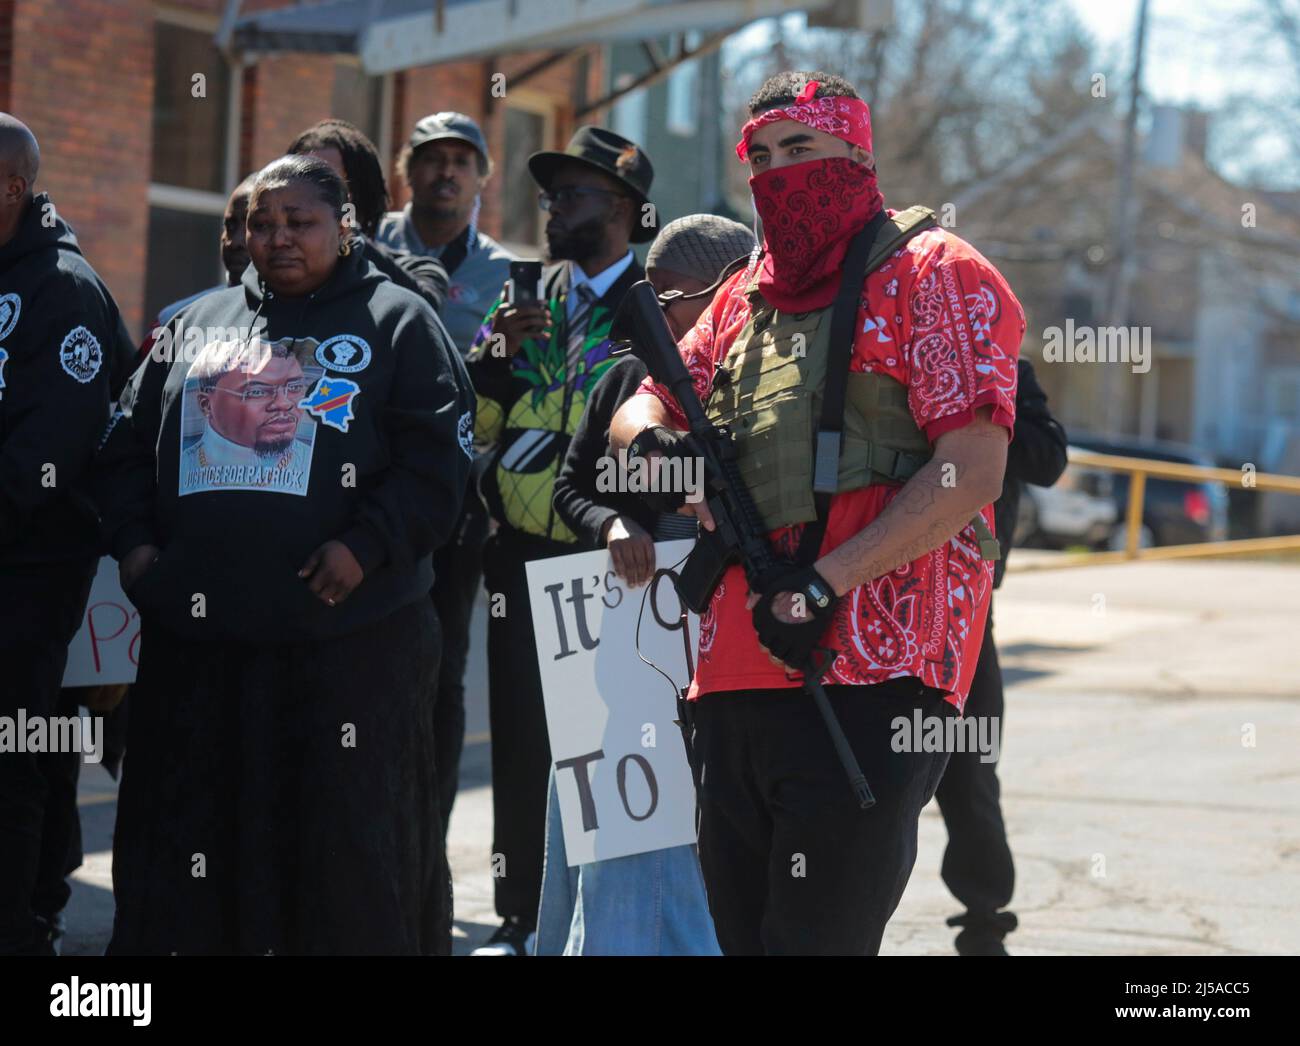 A man carries a weapon during a #Justice4Patrick rally for Patrick Lyoya, an unarmed Black man who was shot and killed by a Grand Rapids Police officer during a traffic stop on April 4th, in Lansing, Michigan, U.S., April 21, 2022.  REUTERS/Rebecca Cook Stock Photo